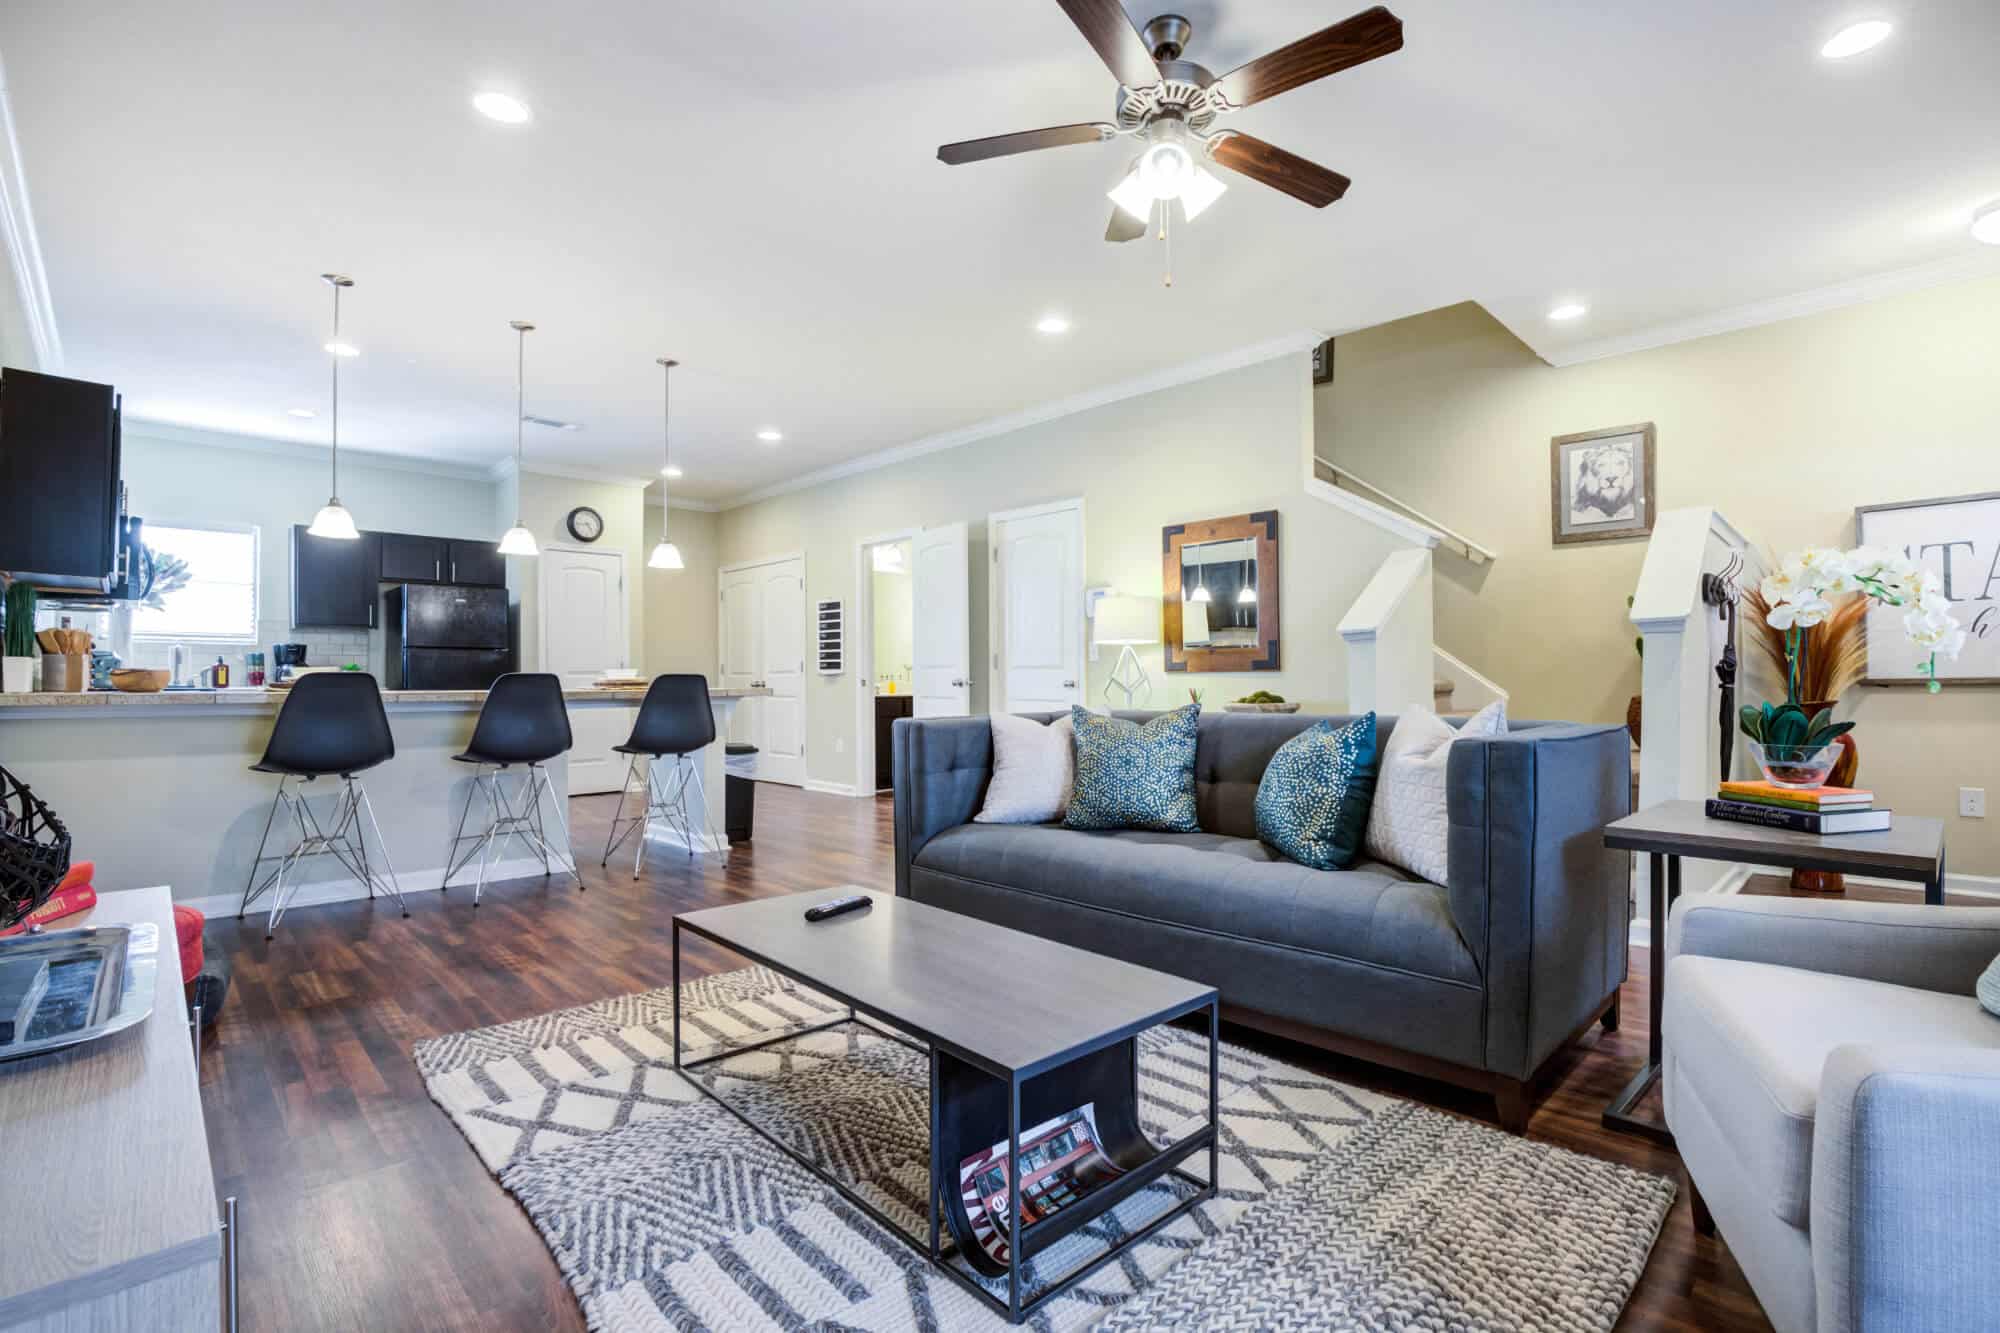 the collective at clemson off campus apartments near clemson university fully furnished 2 story floor plans living room and kitchen guest half bath